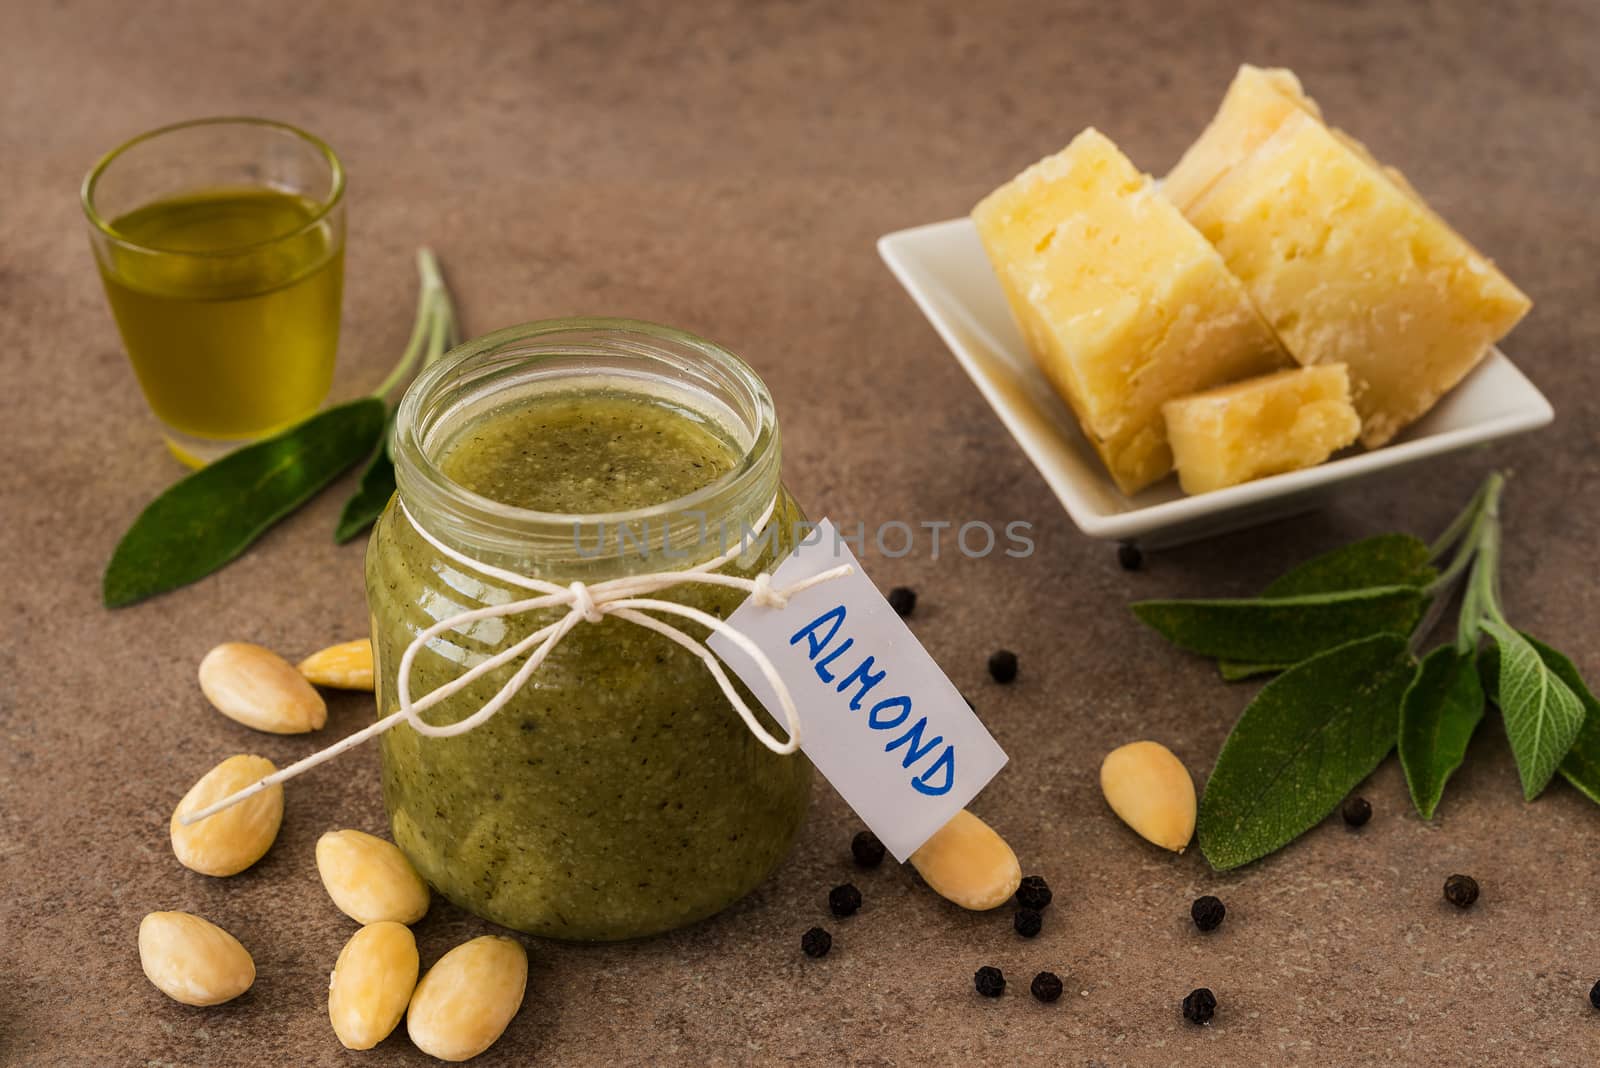 Pesto of almonds and pecorino cheese in a glass jar on a wooden table